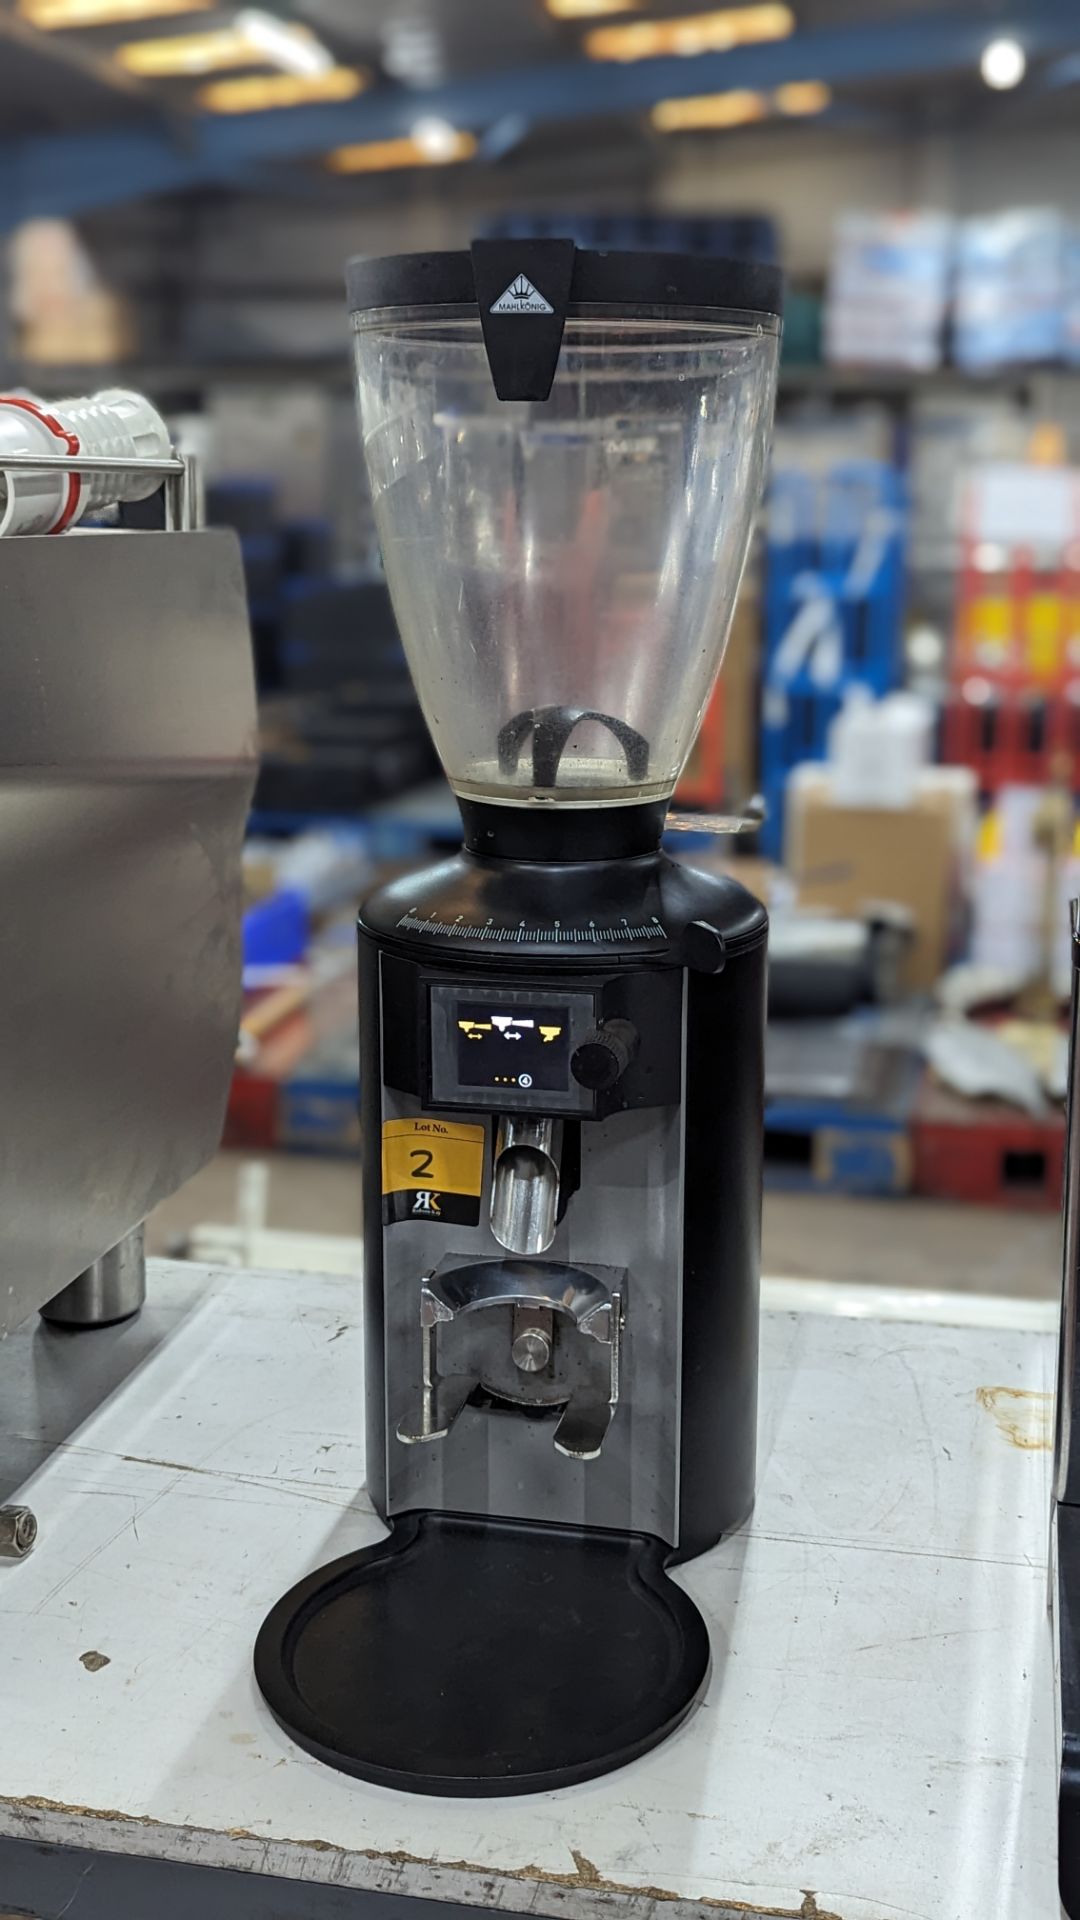 Anfim Pratica commercial coffee grinder with digital display, model AE652.4B - Image 2 of 17